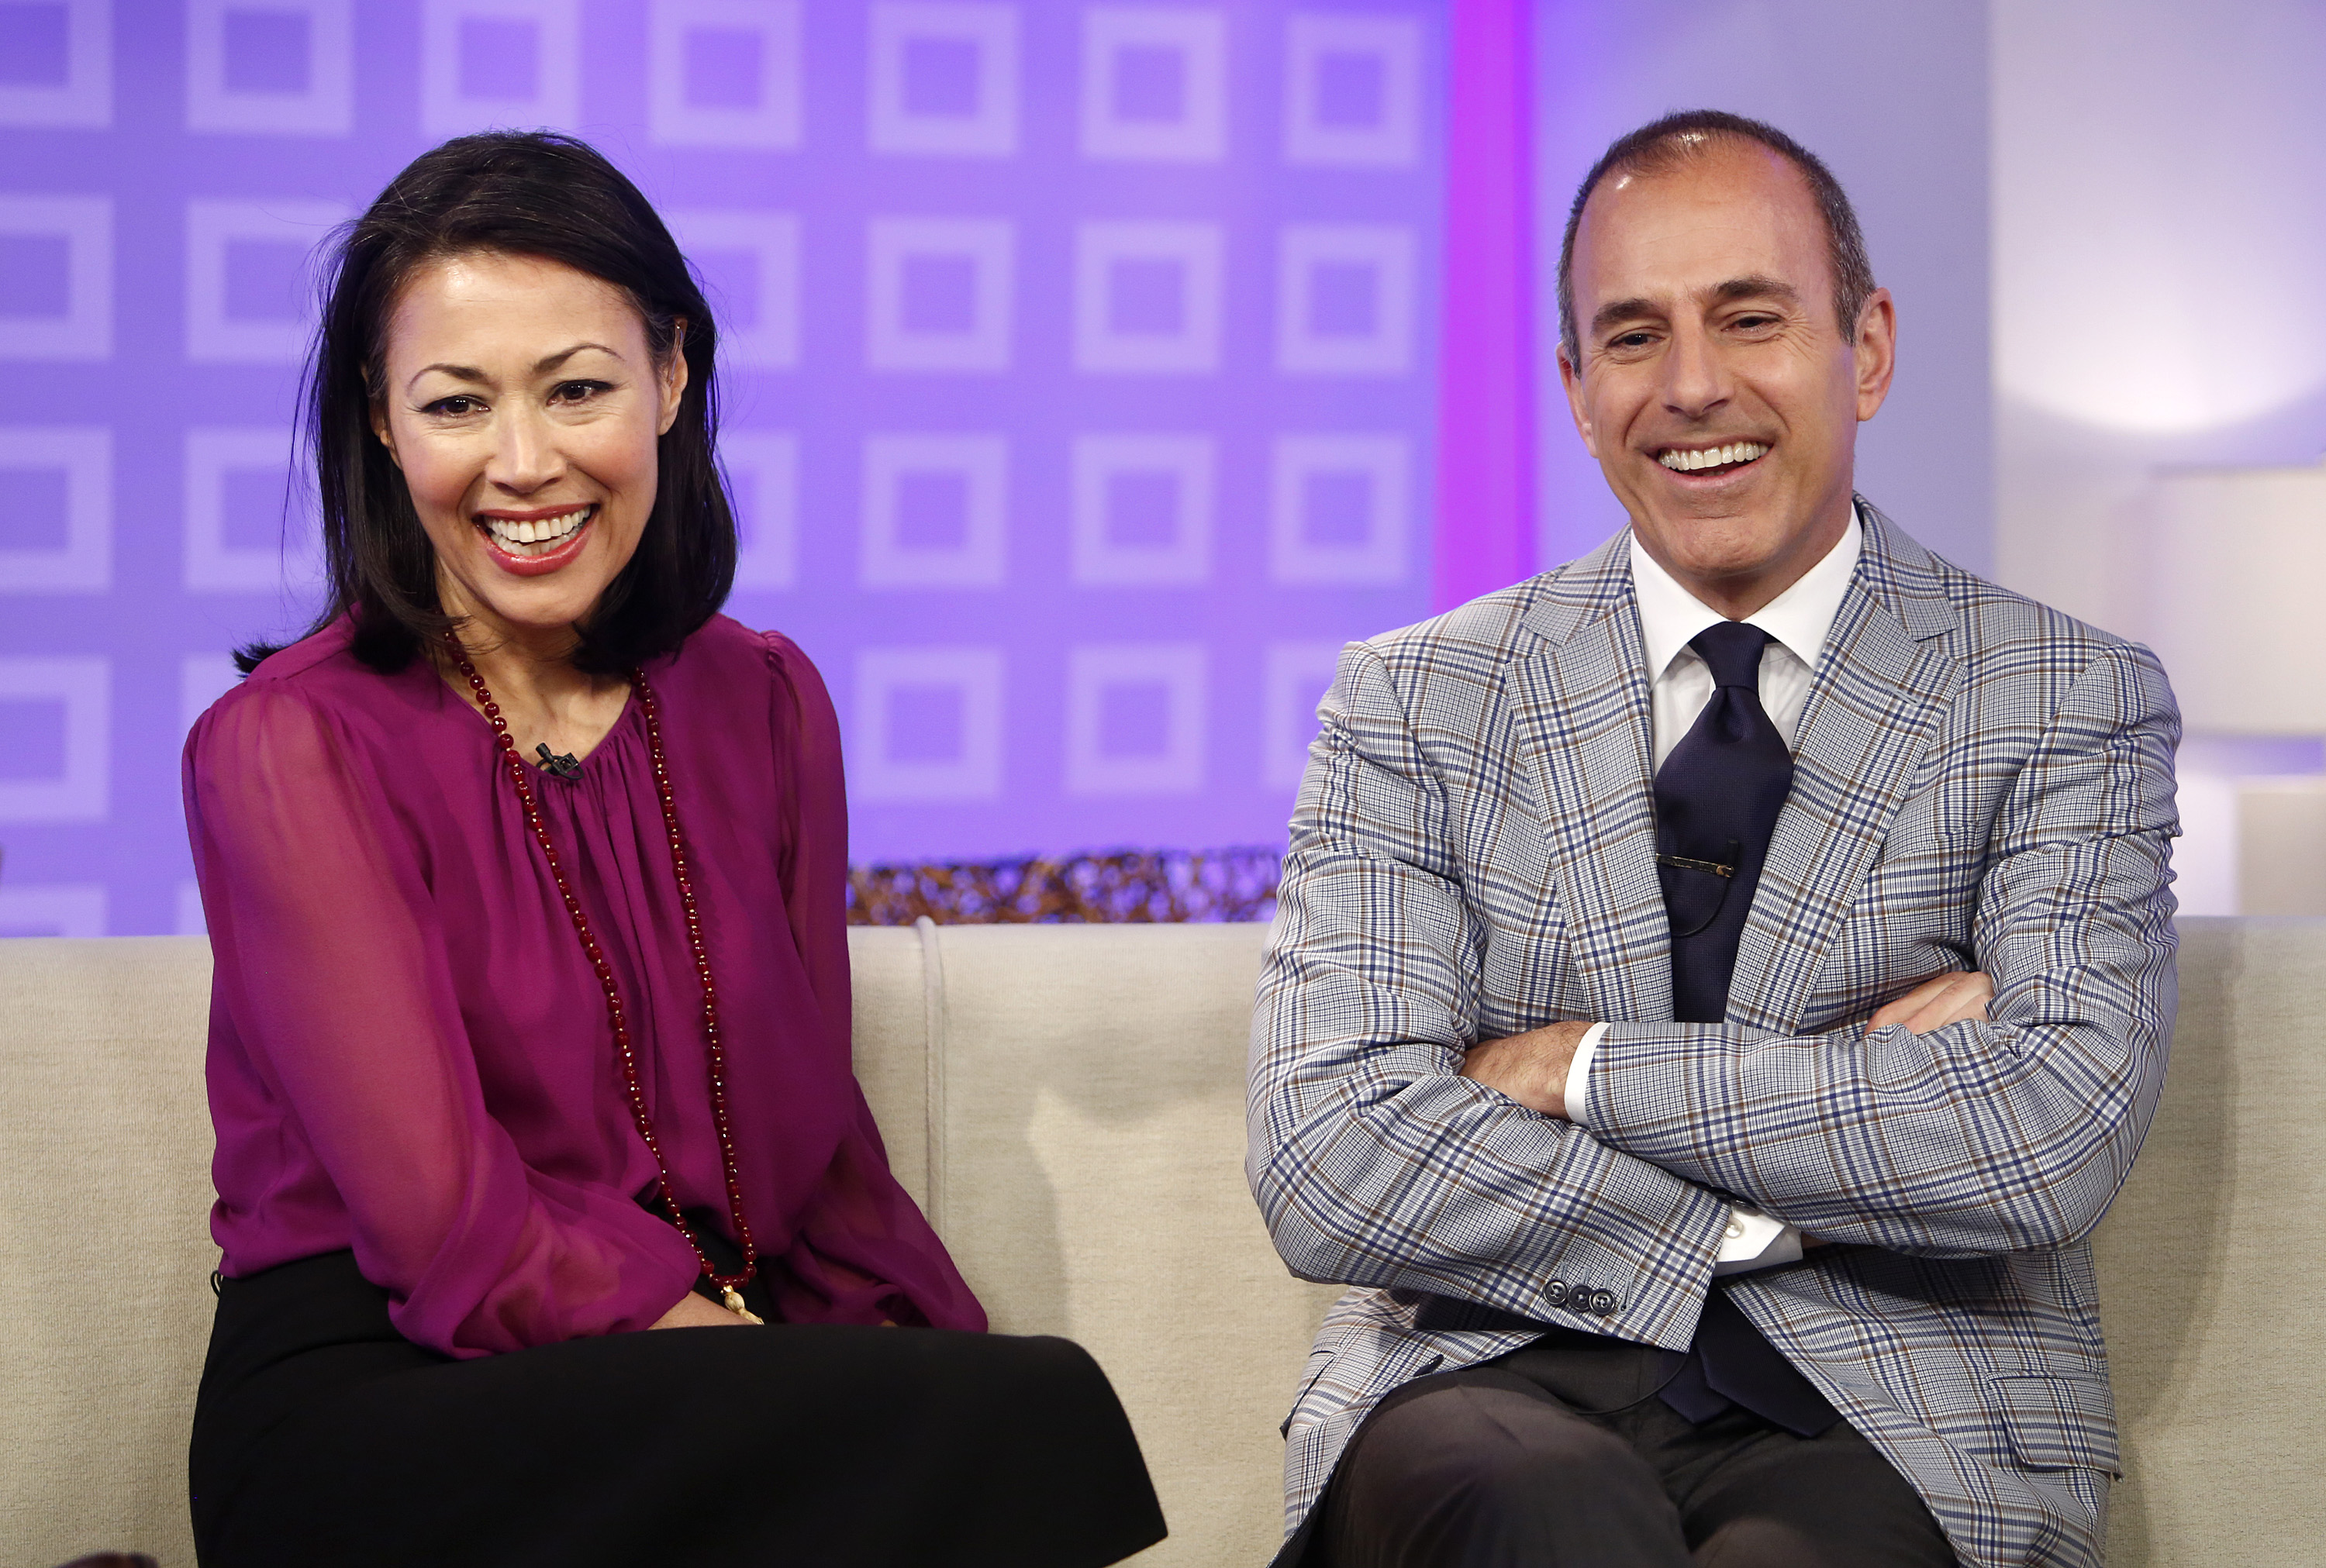 Ann Curry and Matt Lauer on 'Today'